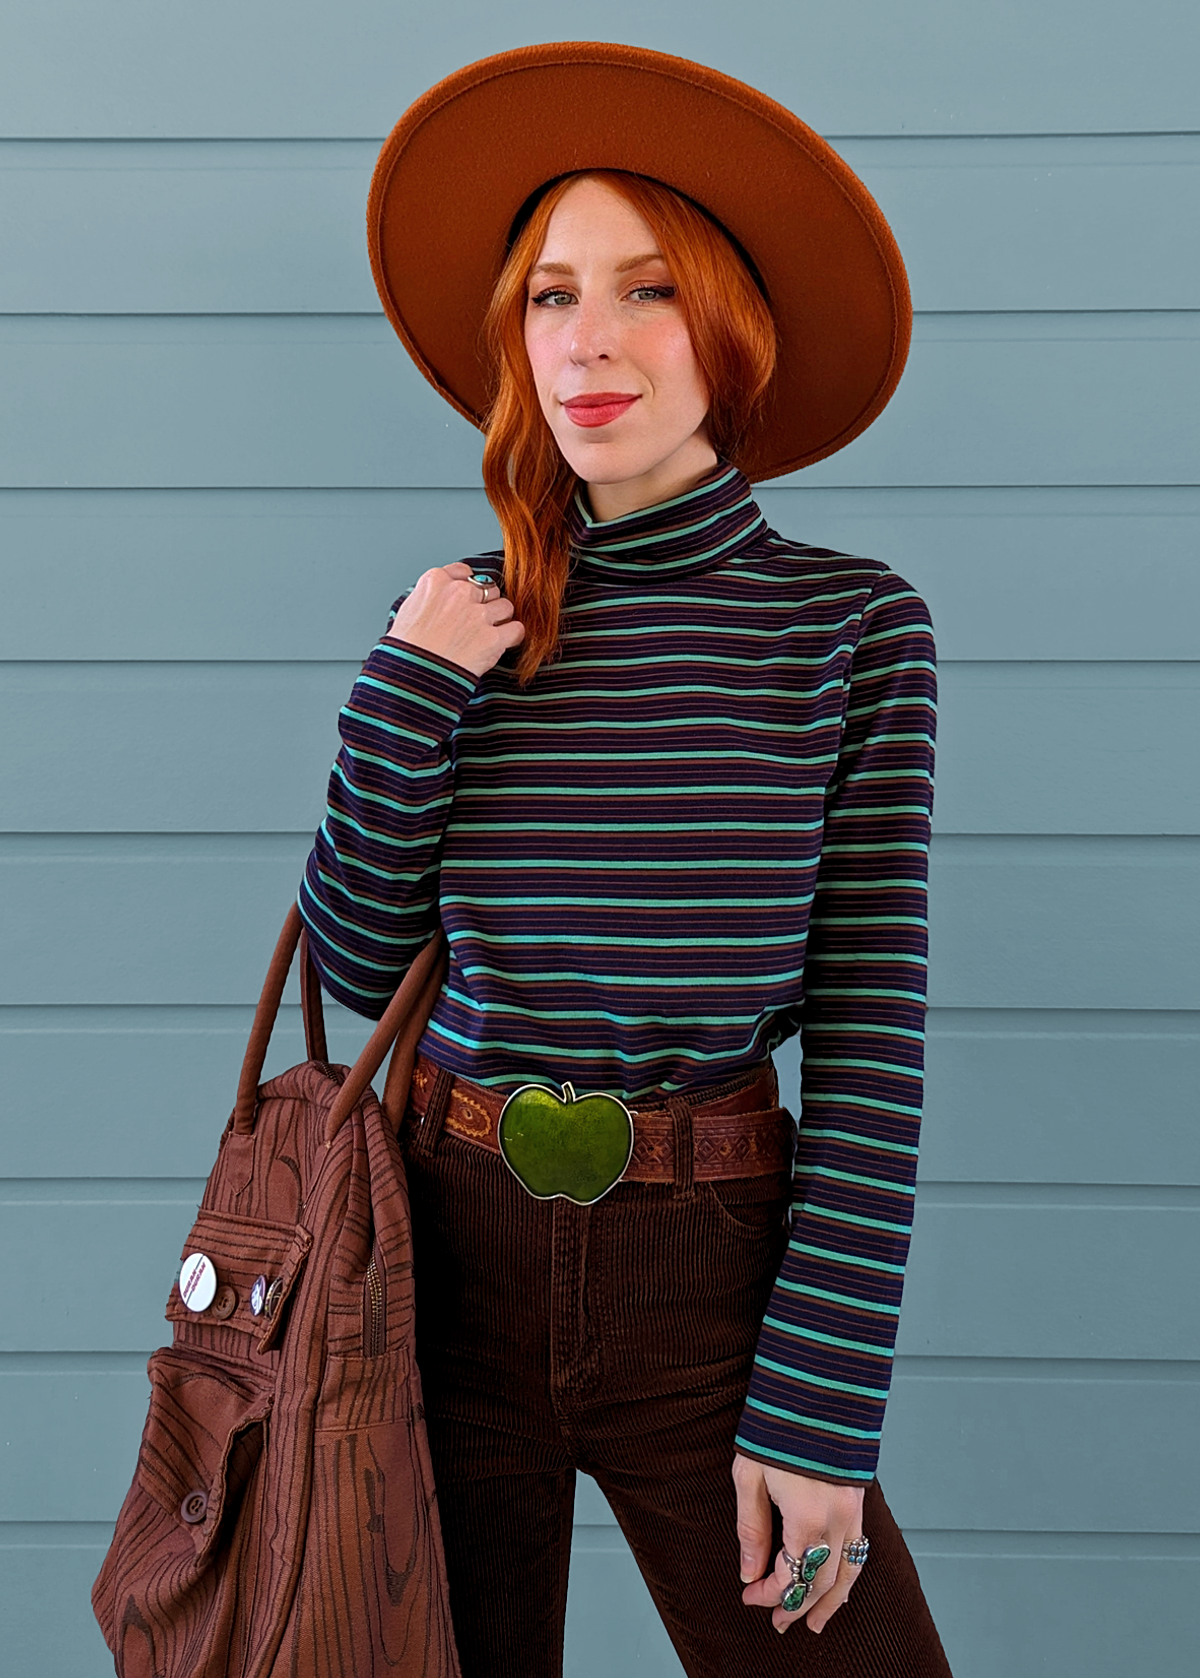 70s inspired slouchy fit long sleeve cotton turtleneck tee with brown, navy, and teal stripes, by Nice Things by Paloma S